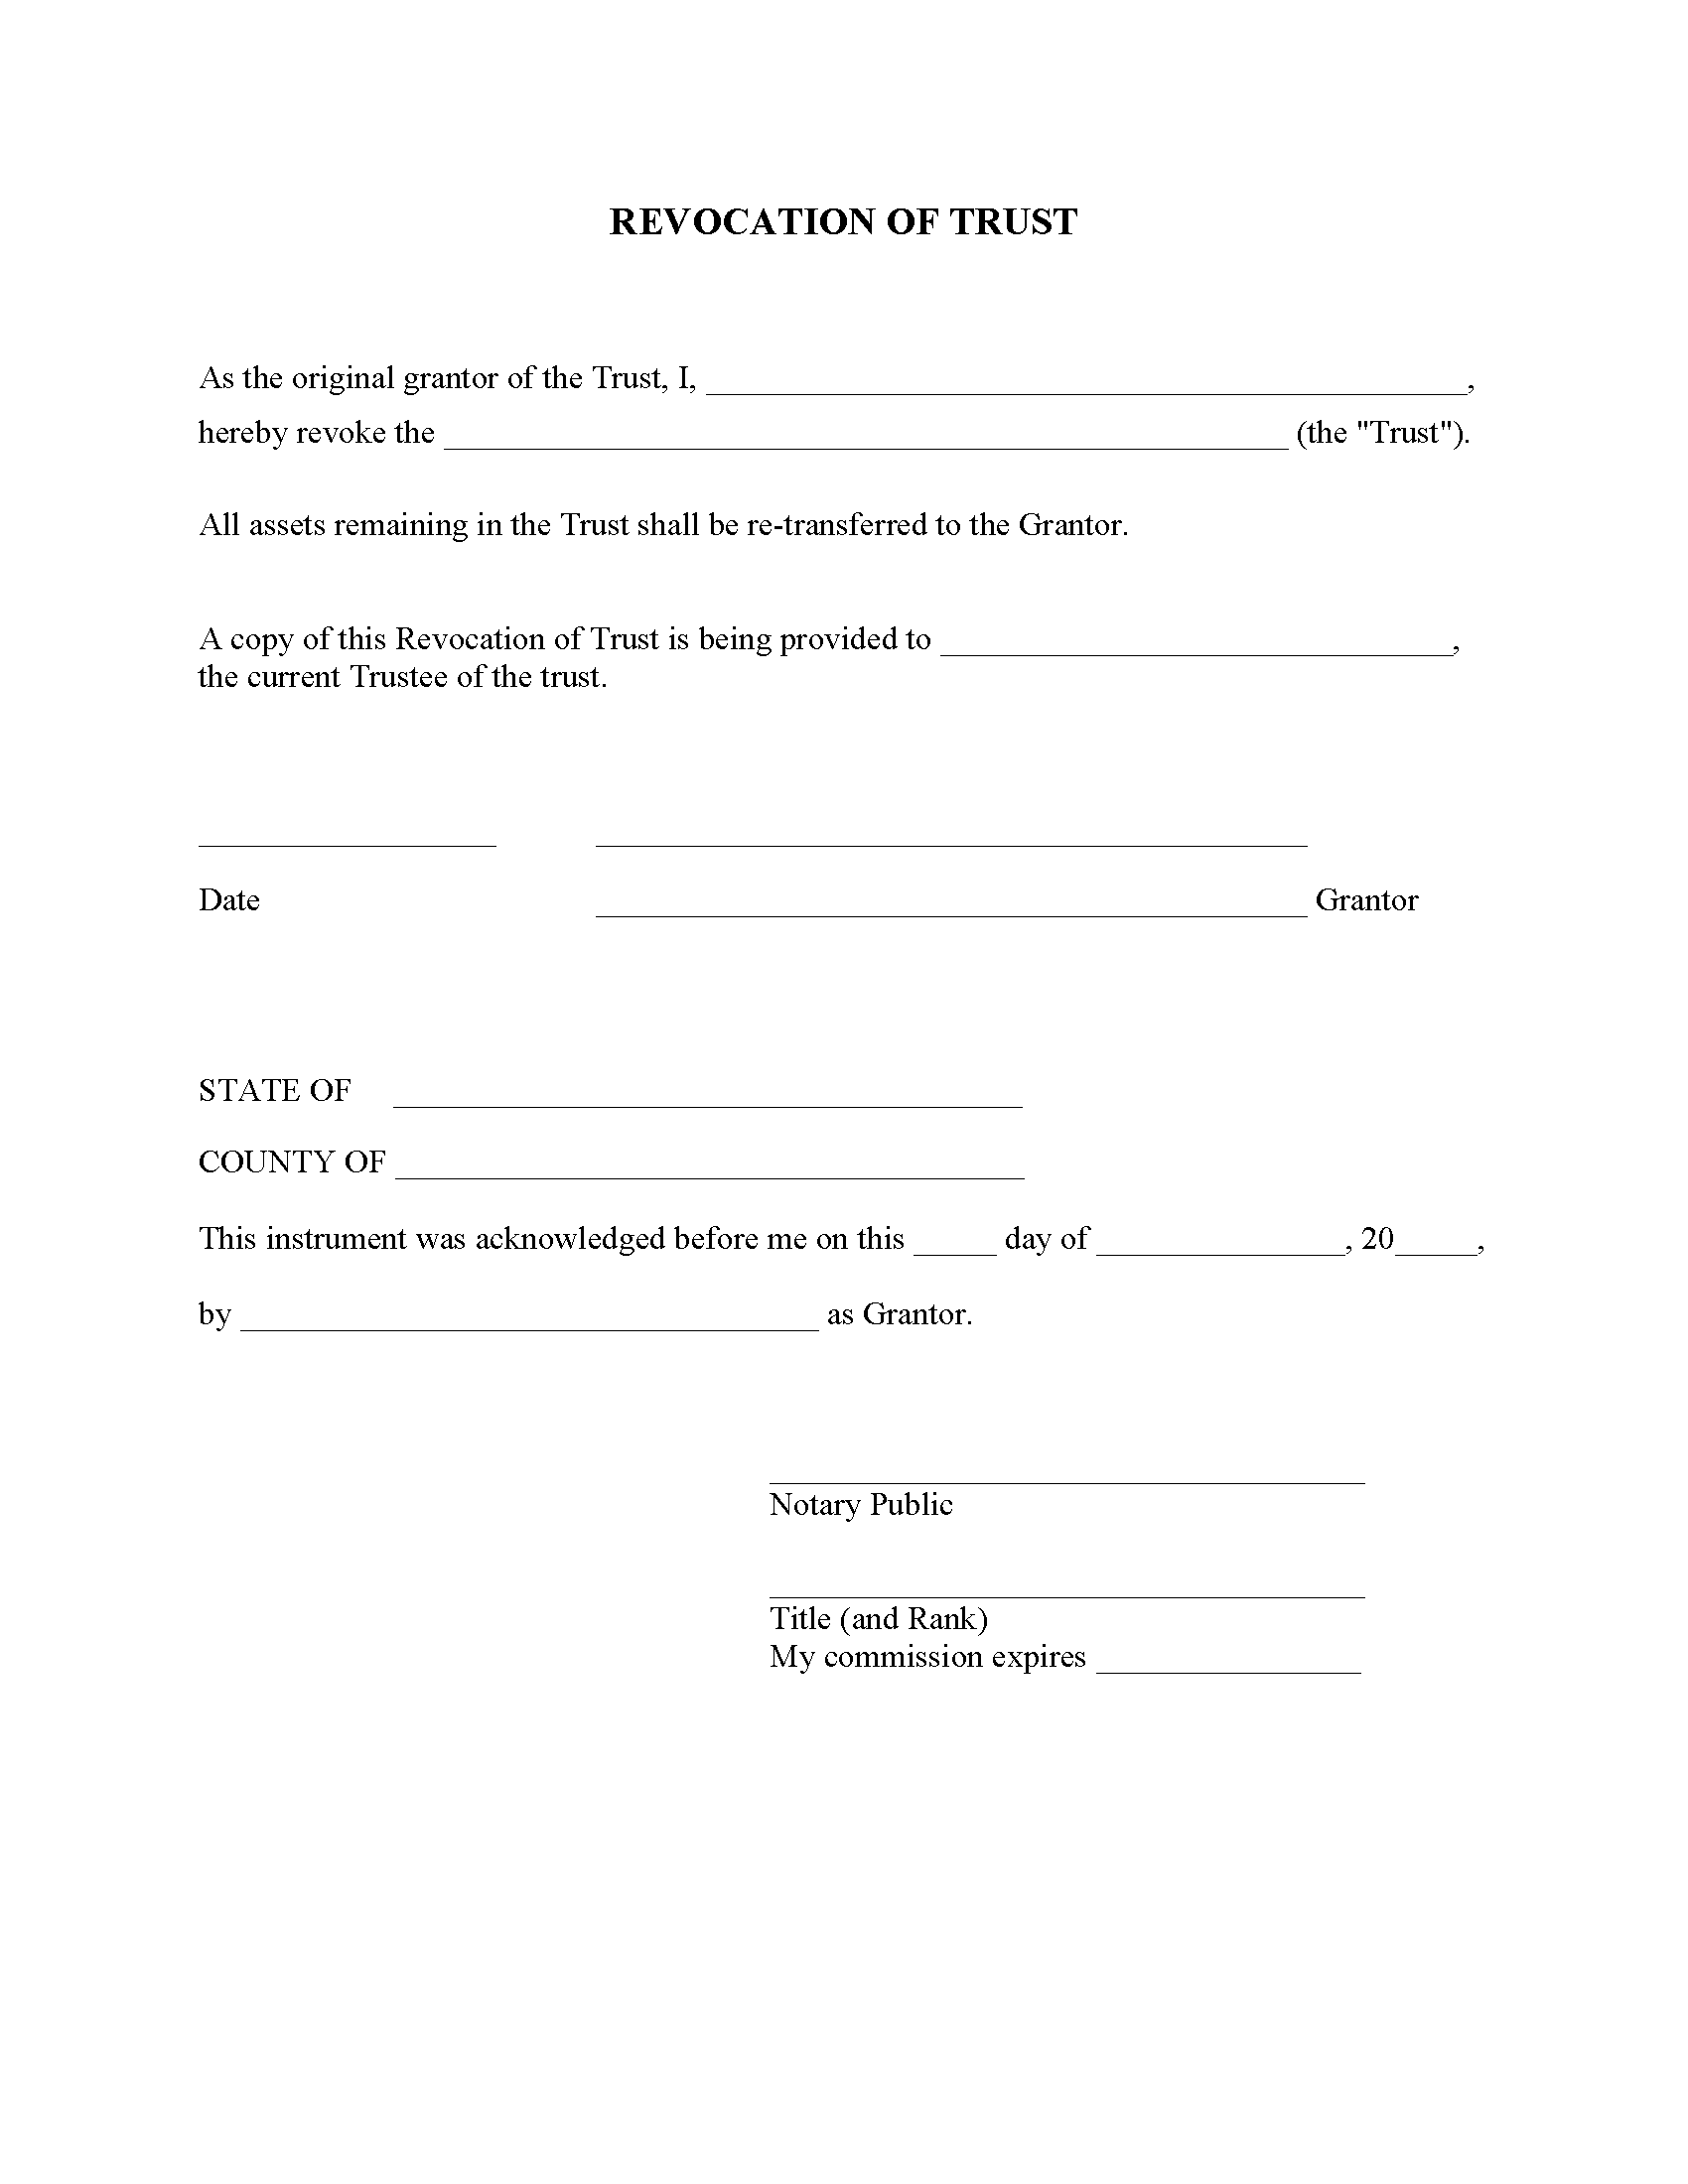 indiana-revocation-of-trust-form-free-printable-legal-forms